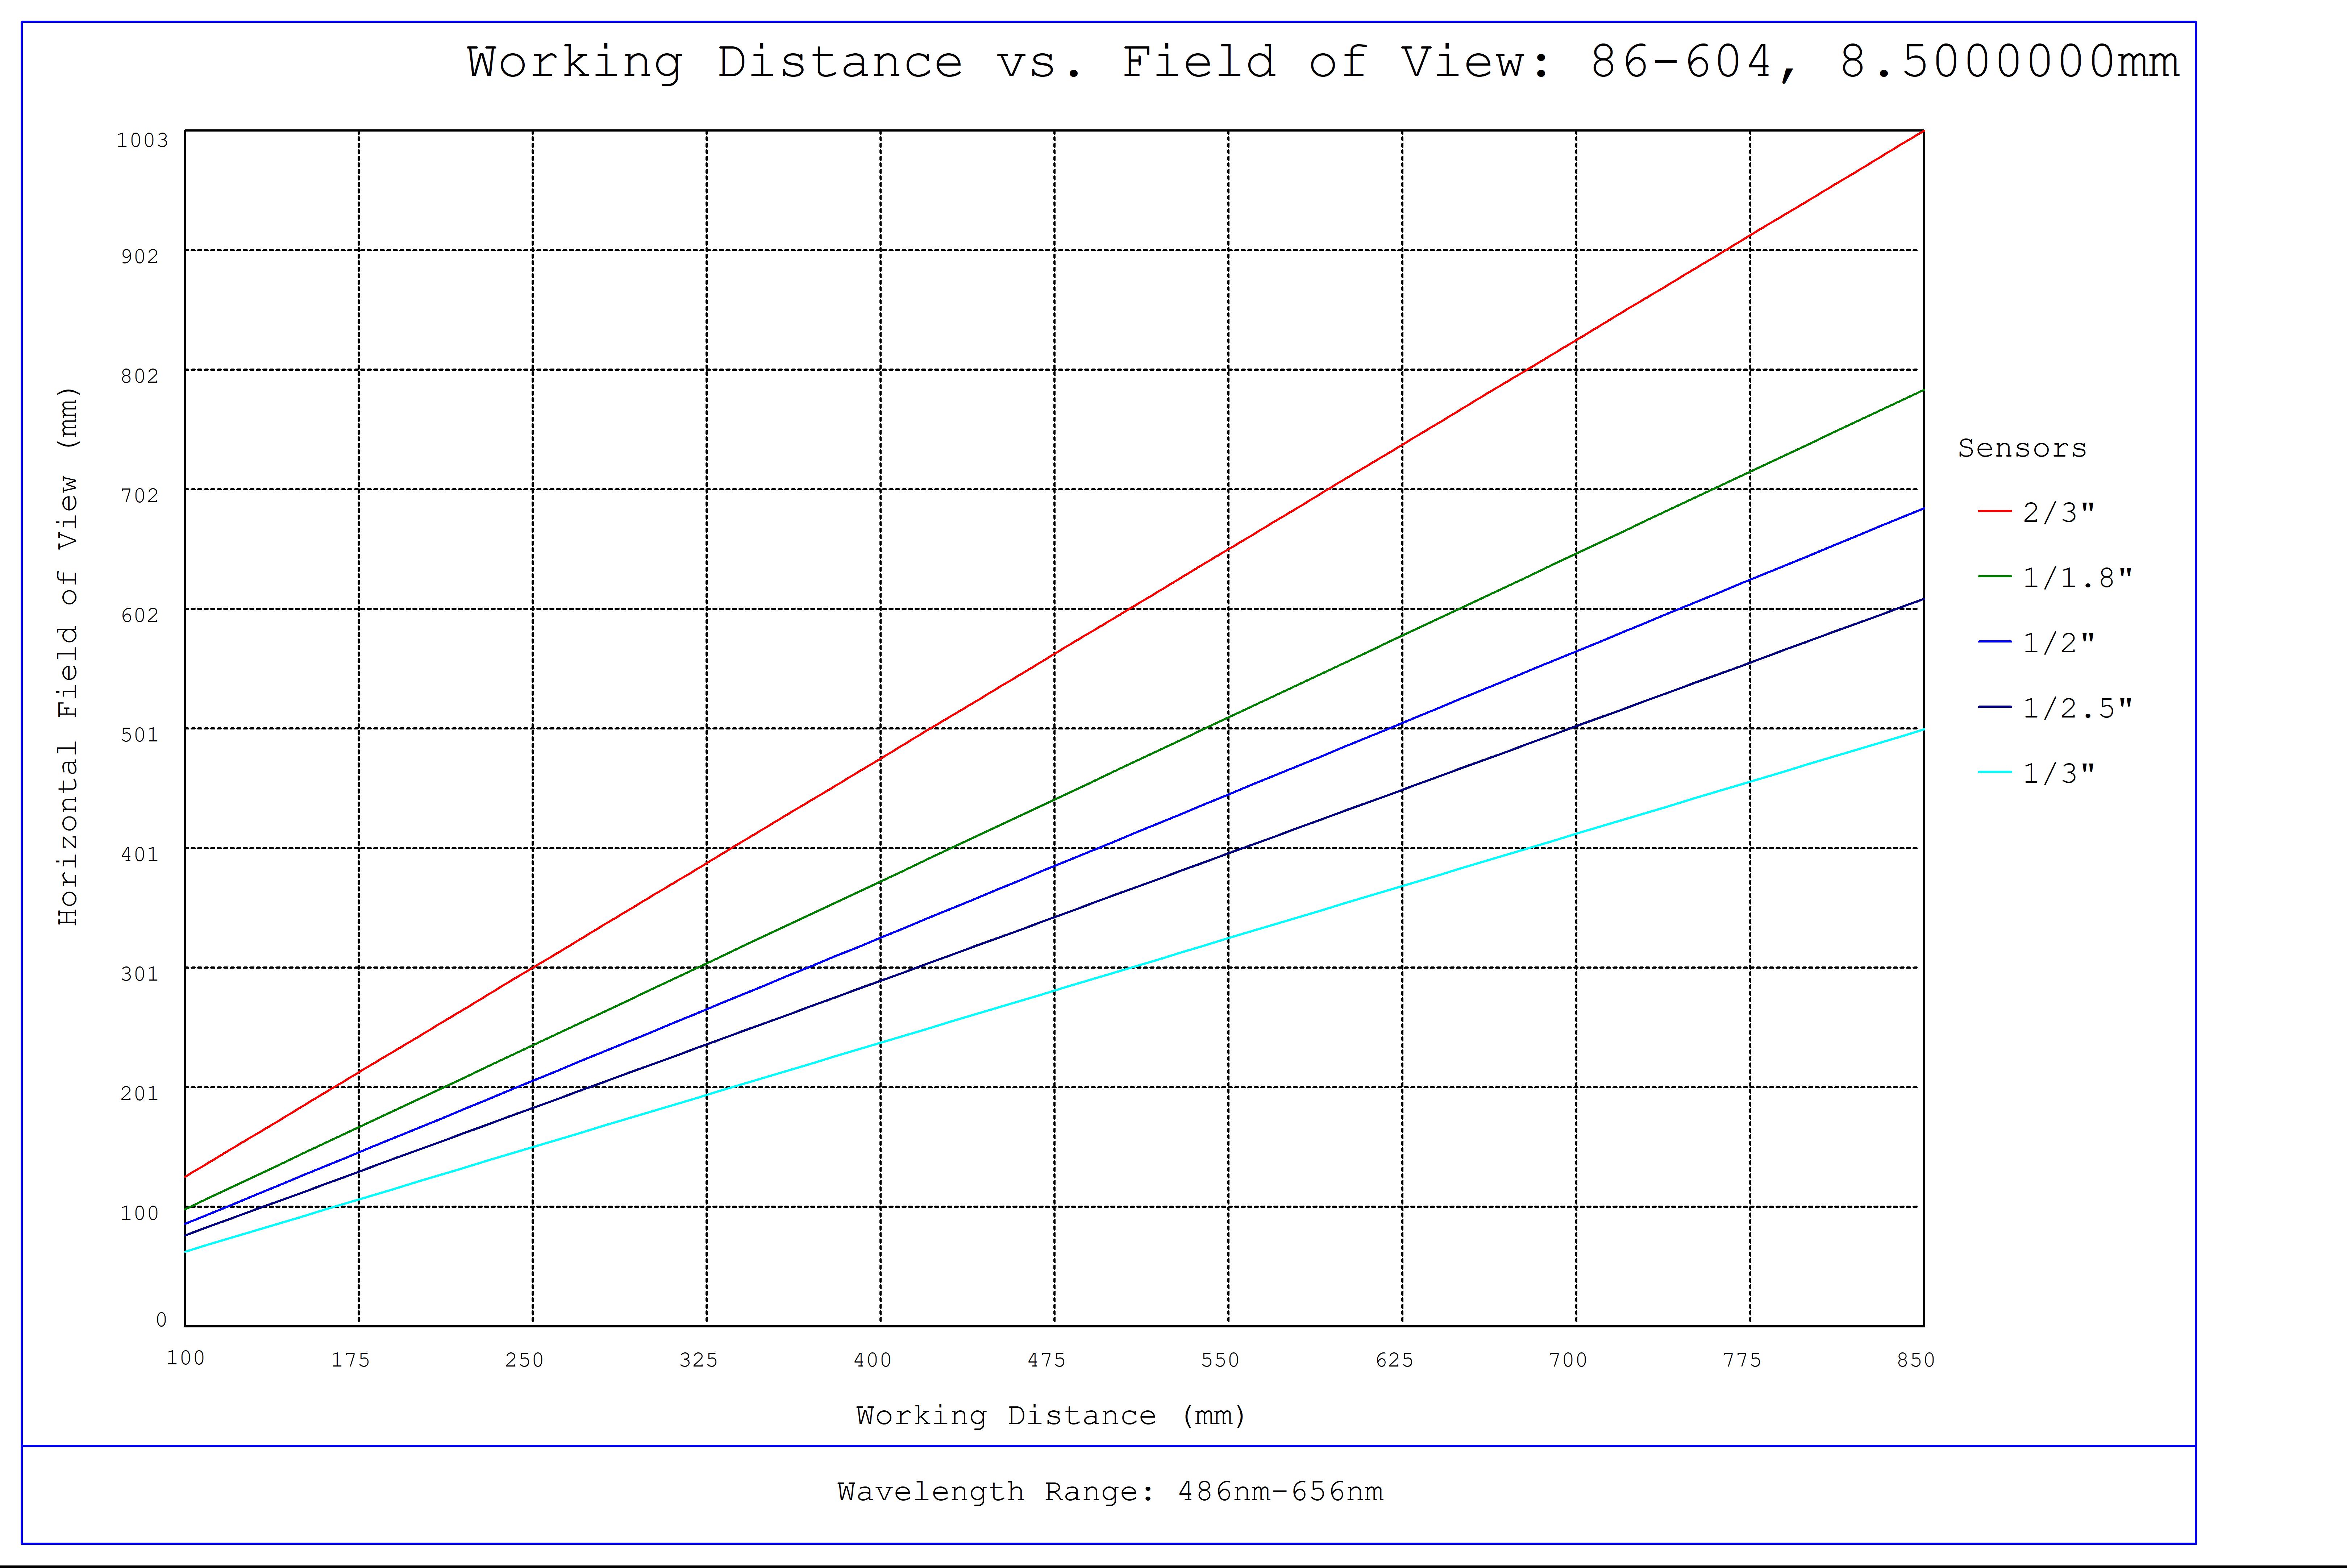 #86-604, 8.5mm, f/8 Ci Series Fixed Focal Length Lens, Working Distance versus Field of View Plot